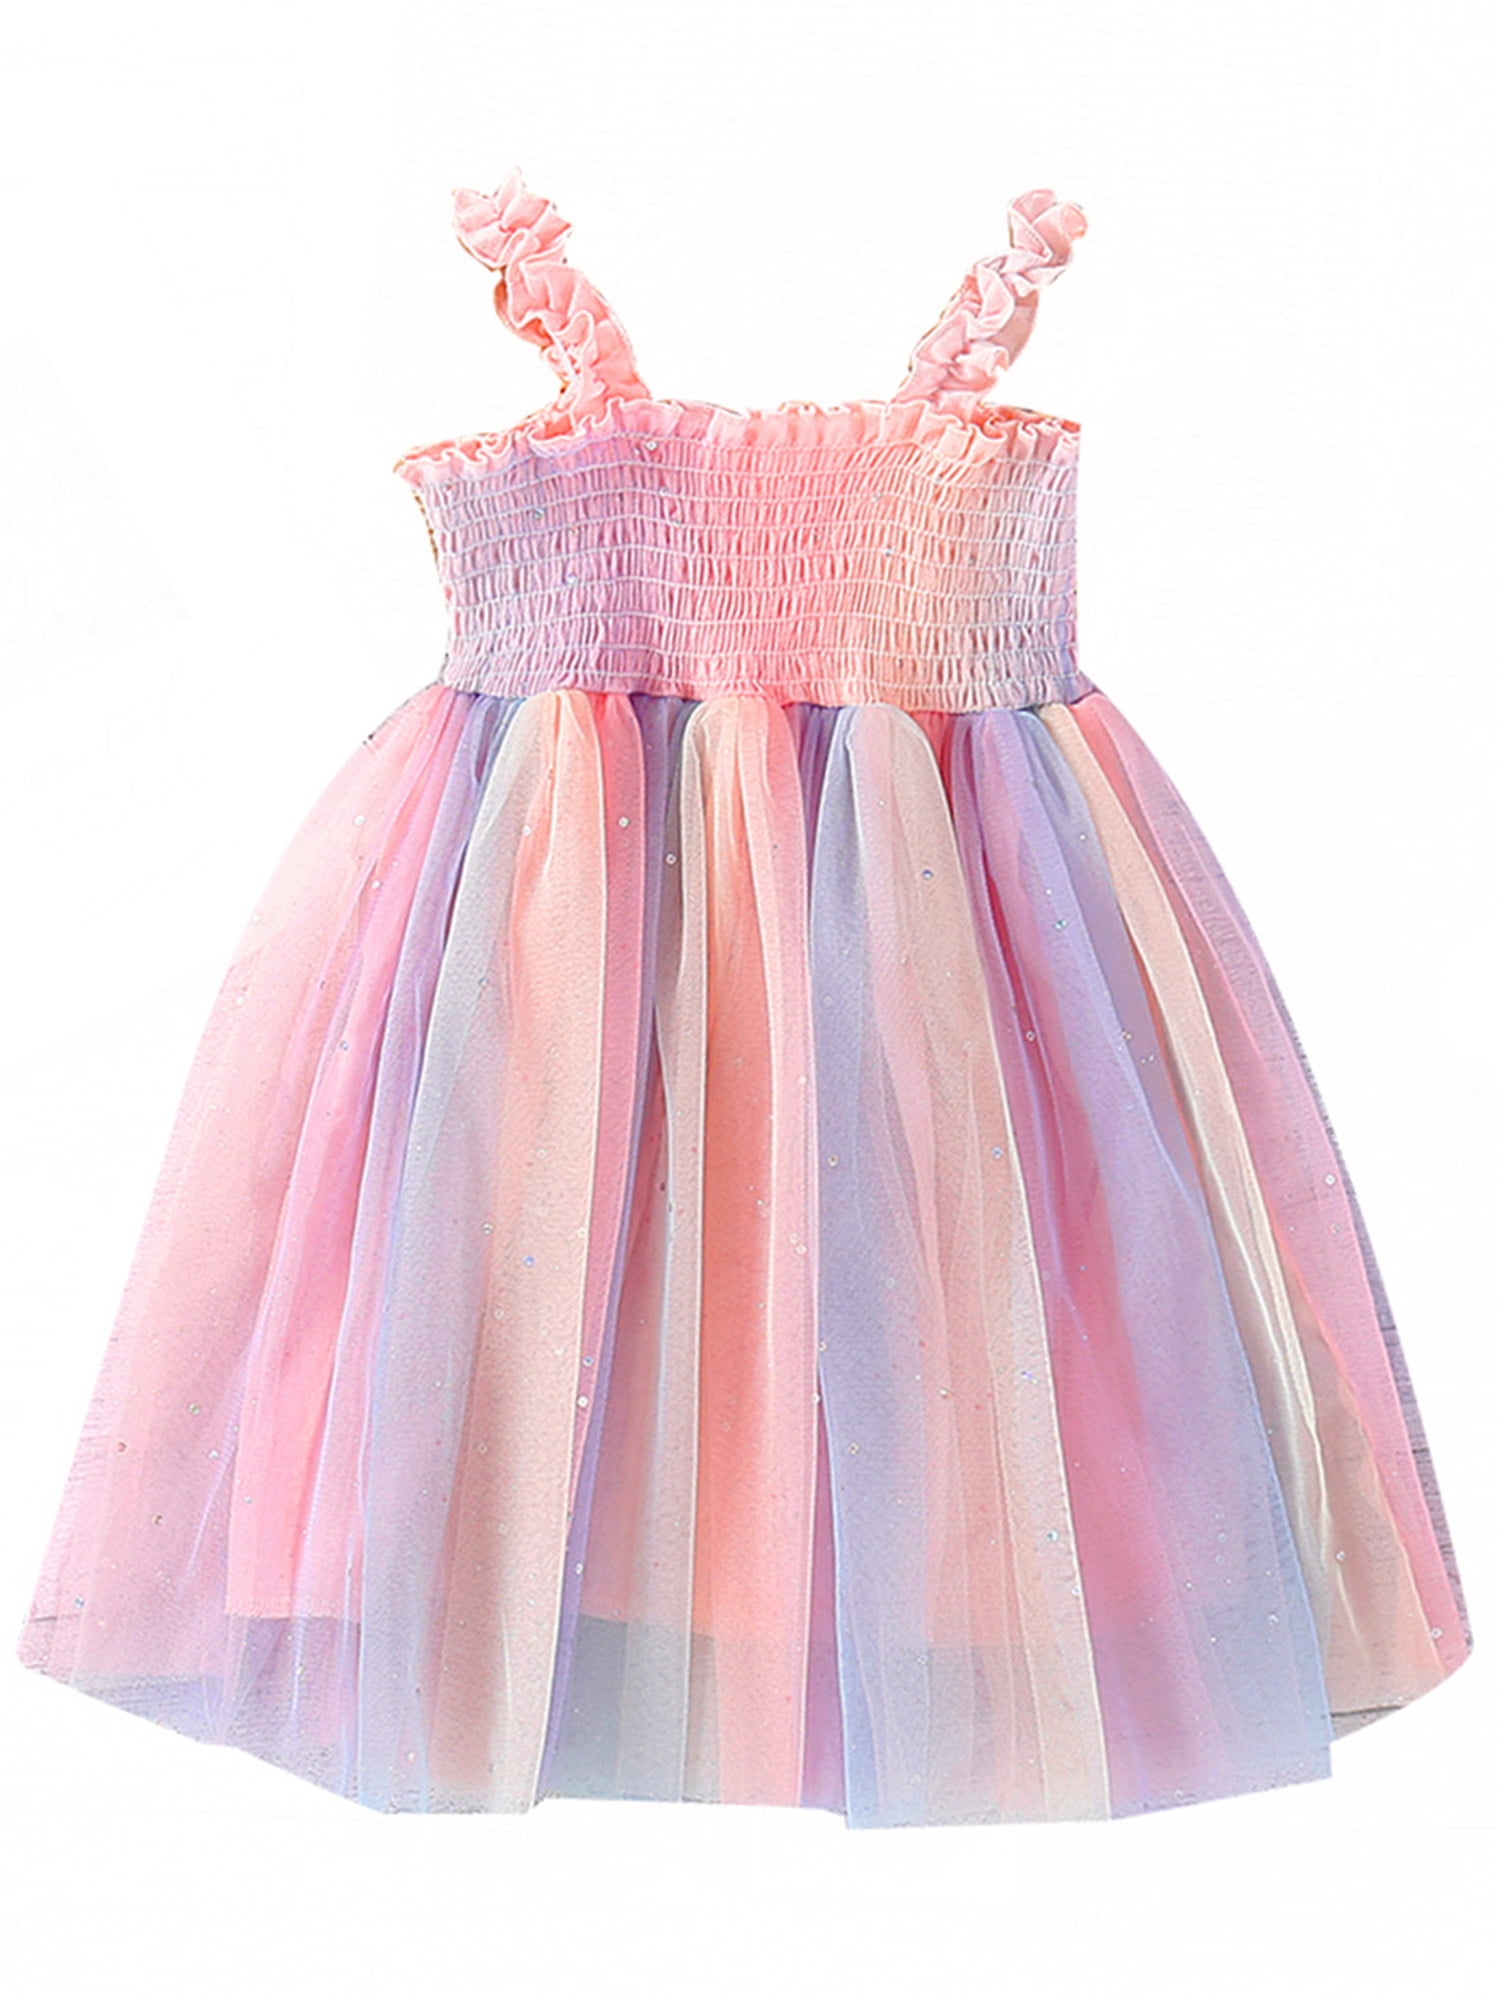 Toddler Infant Girl Childrens Place Tulle Skirt Sizes 12-18M 18-24M 2T NWT 